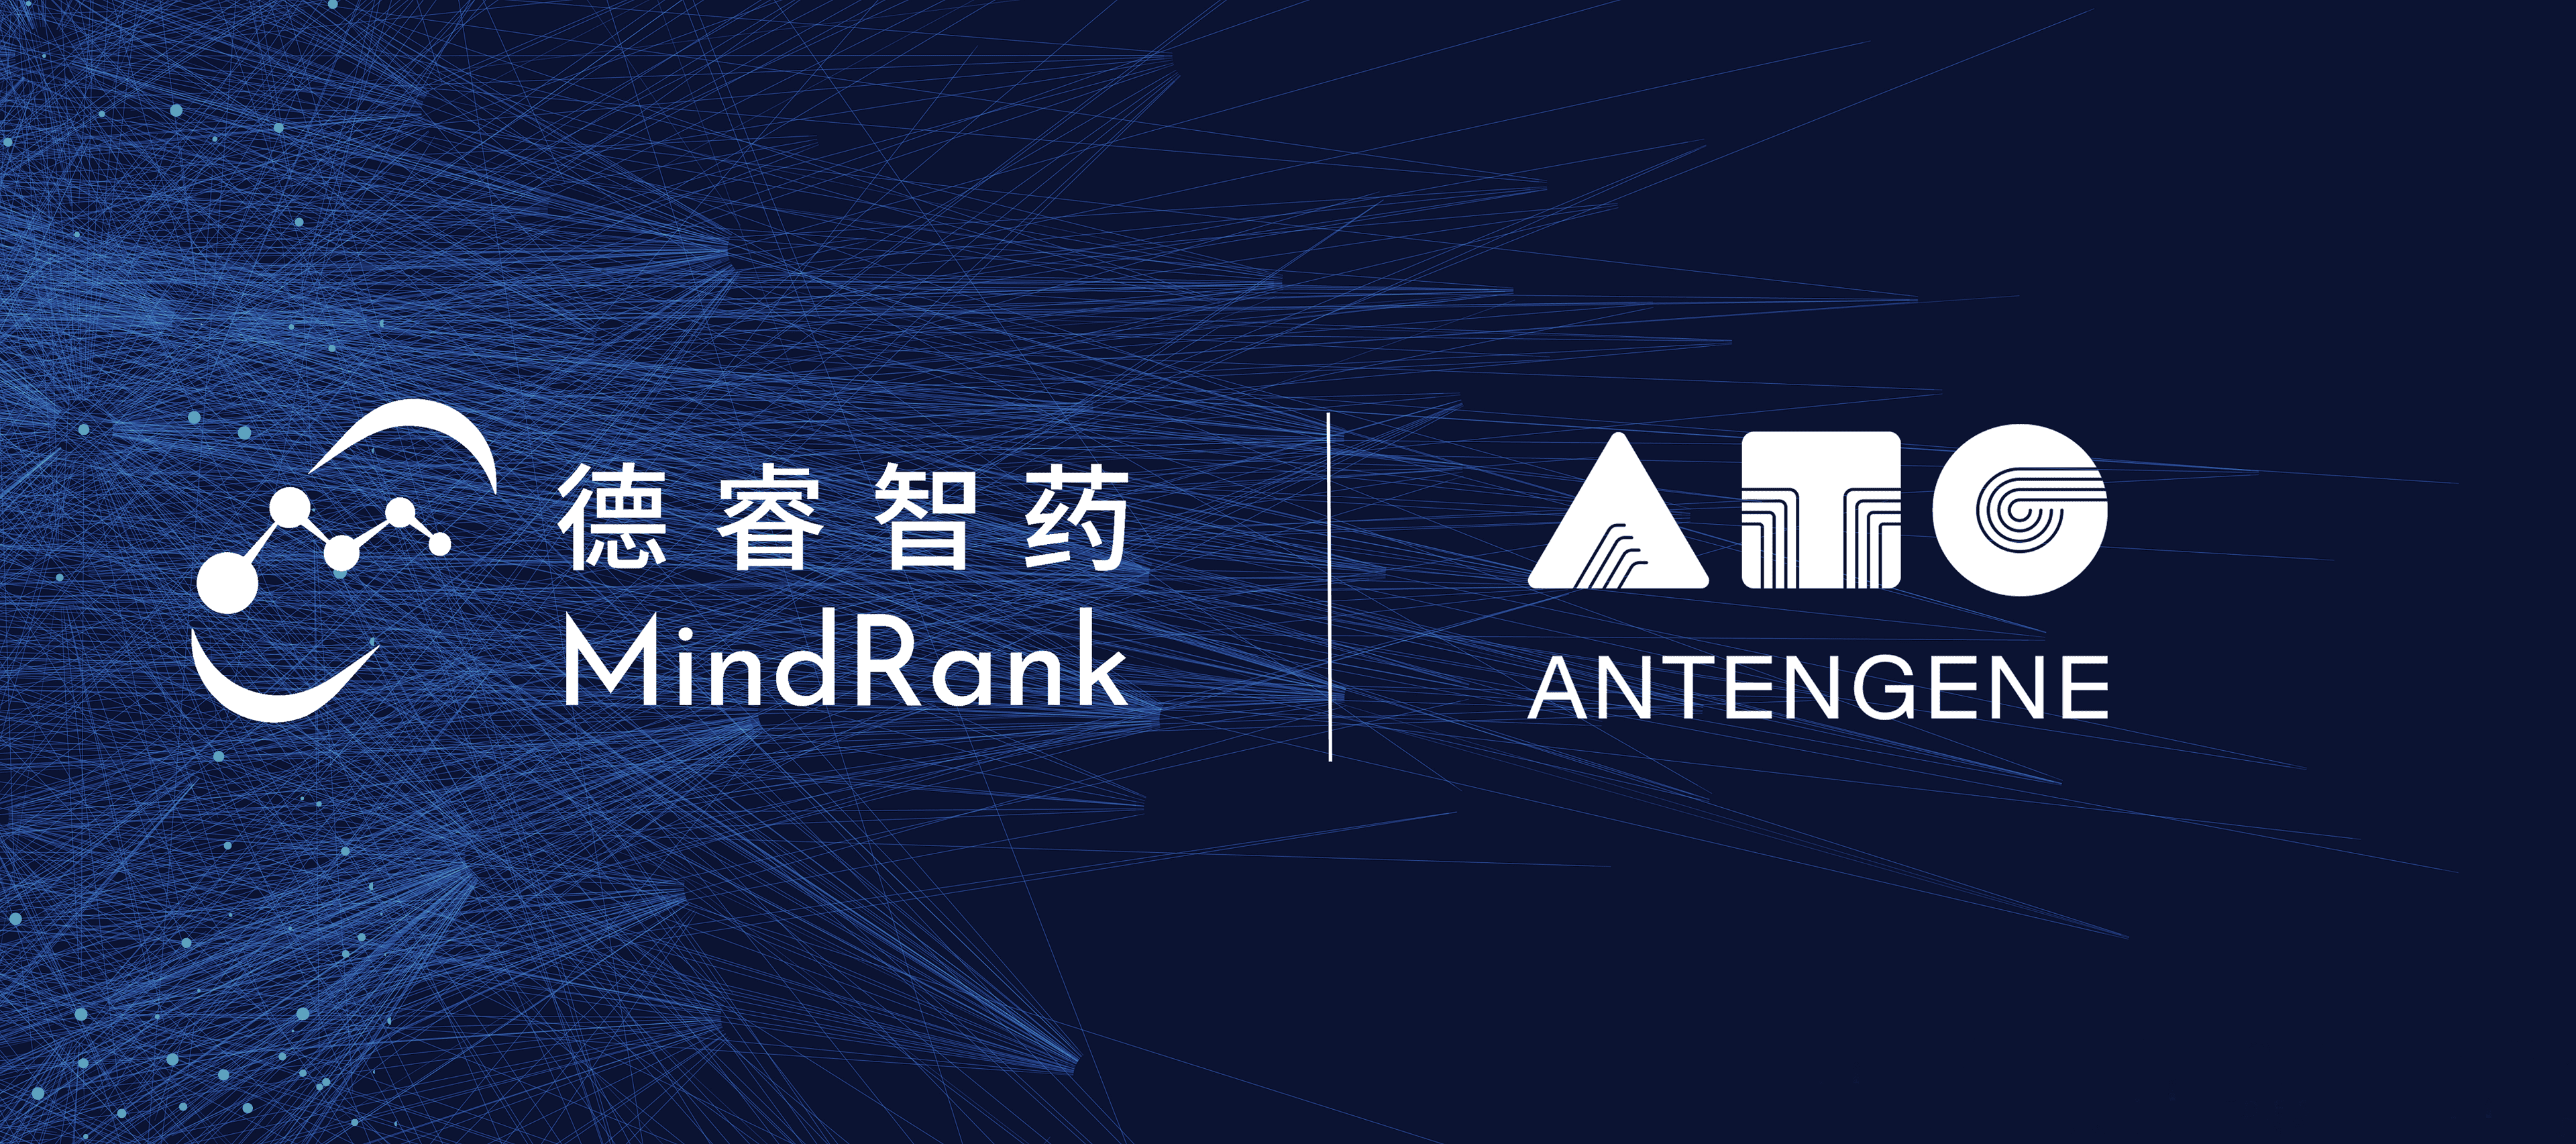 MindRank Announces Milestone Achievement in Antengene (6996.HK) Collaboration on Discovery of Dual-Target Lead Compounds